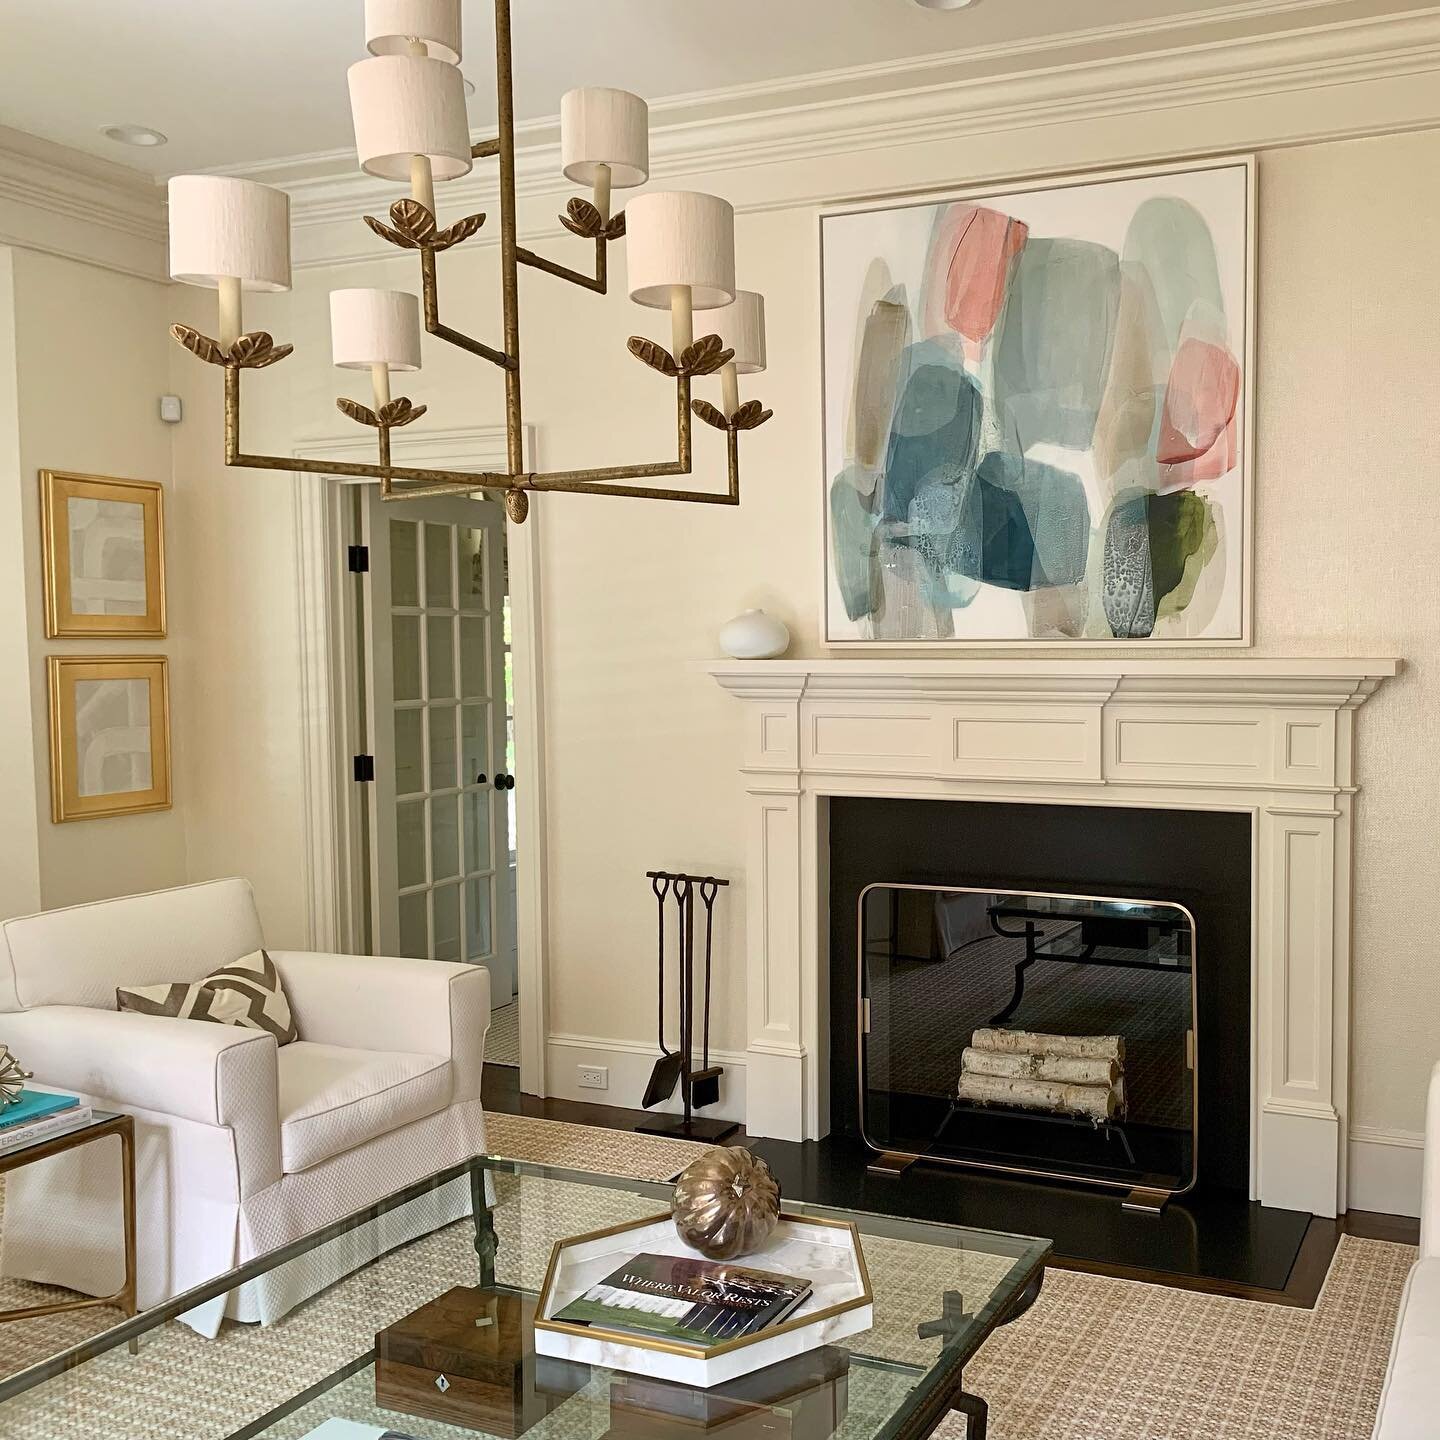 It&rsquo;s the v i e w&bull;

Breathtaking. I&rsquo;m over the moon with this latest living room installation. We custom framed and installed another beauty by Lynn Sanders. Prominent over the fireplace in this formal living space, it&rsquo;s just wh